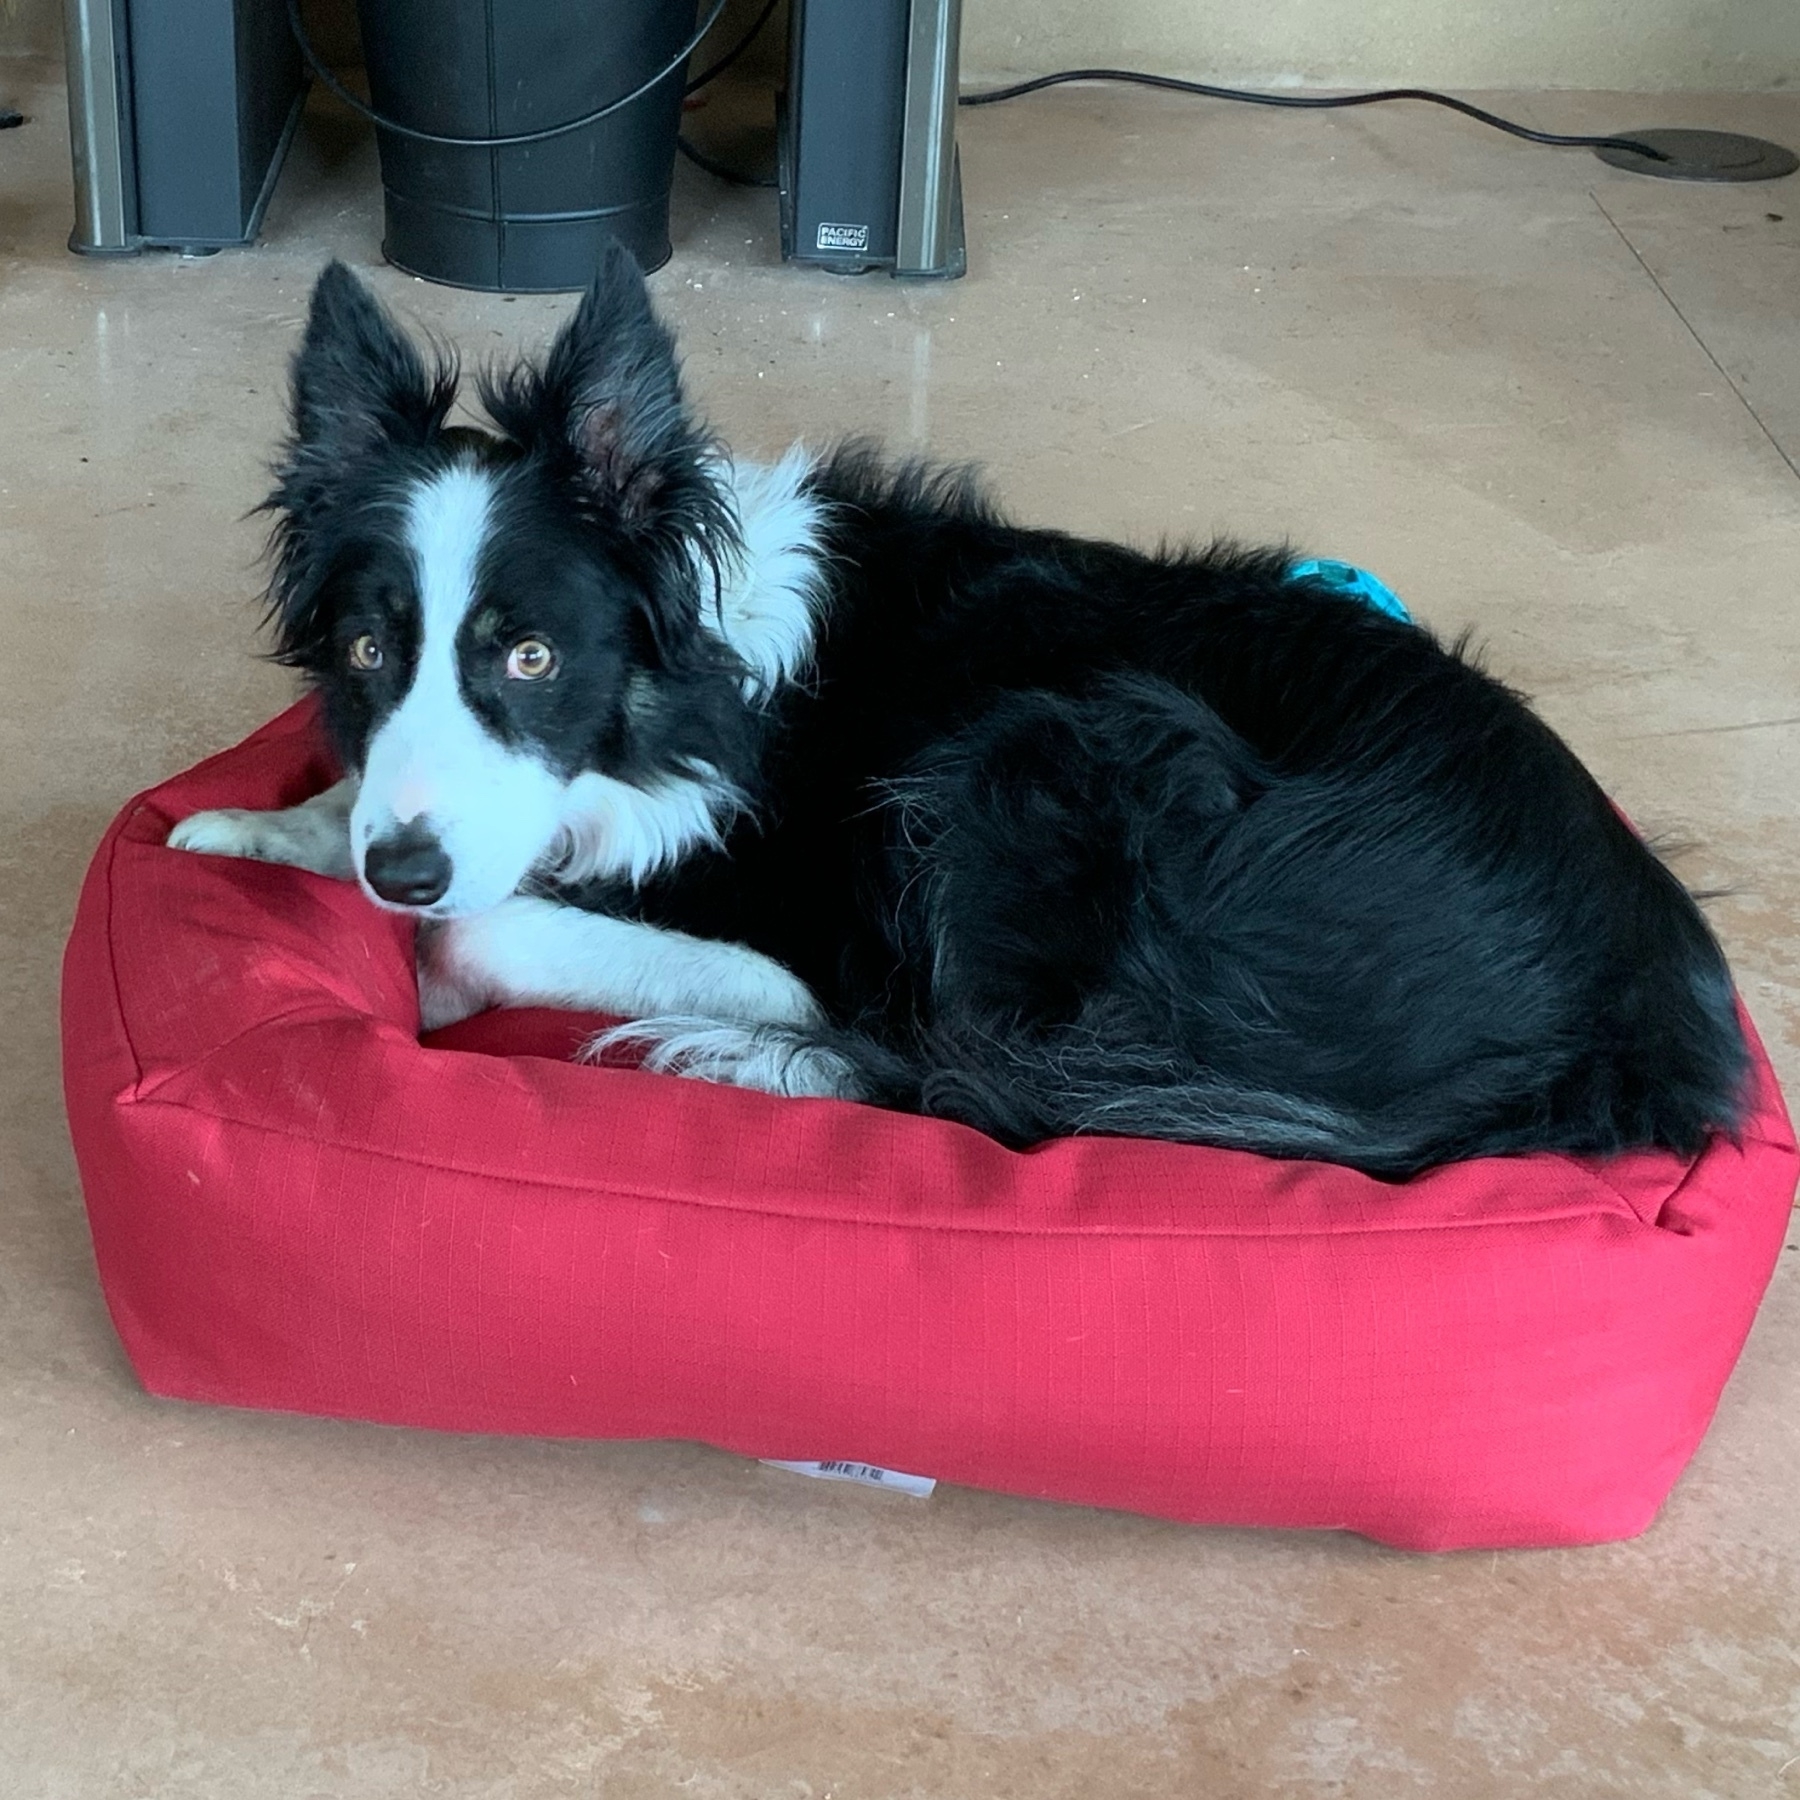 black and white border collie lying in a red dog bed. The dog and bed are about the same size